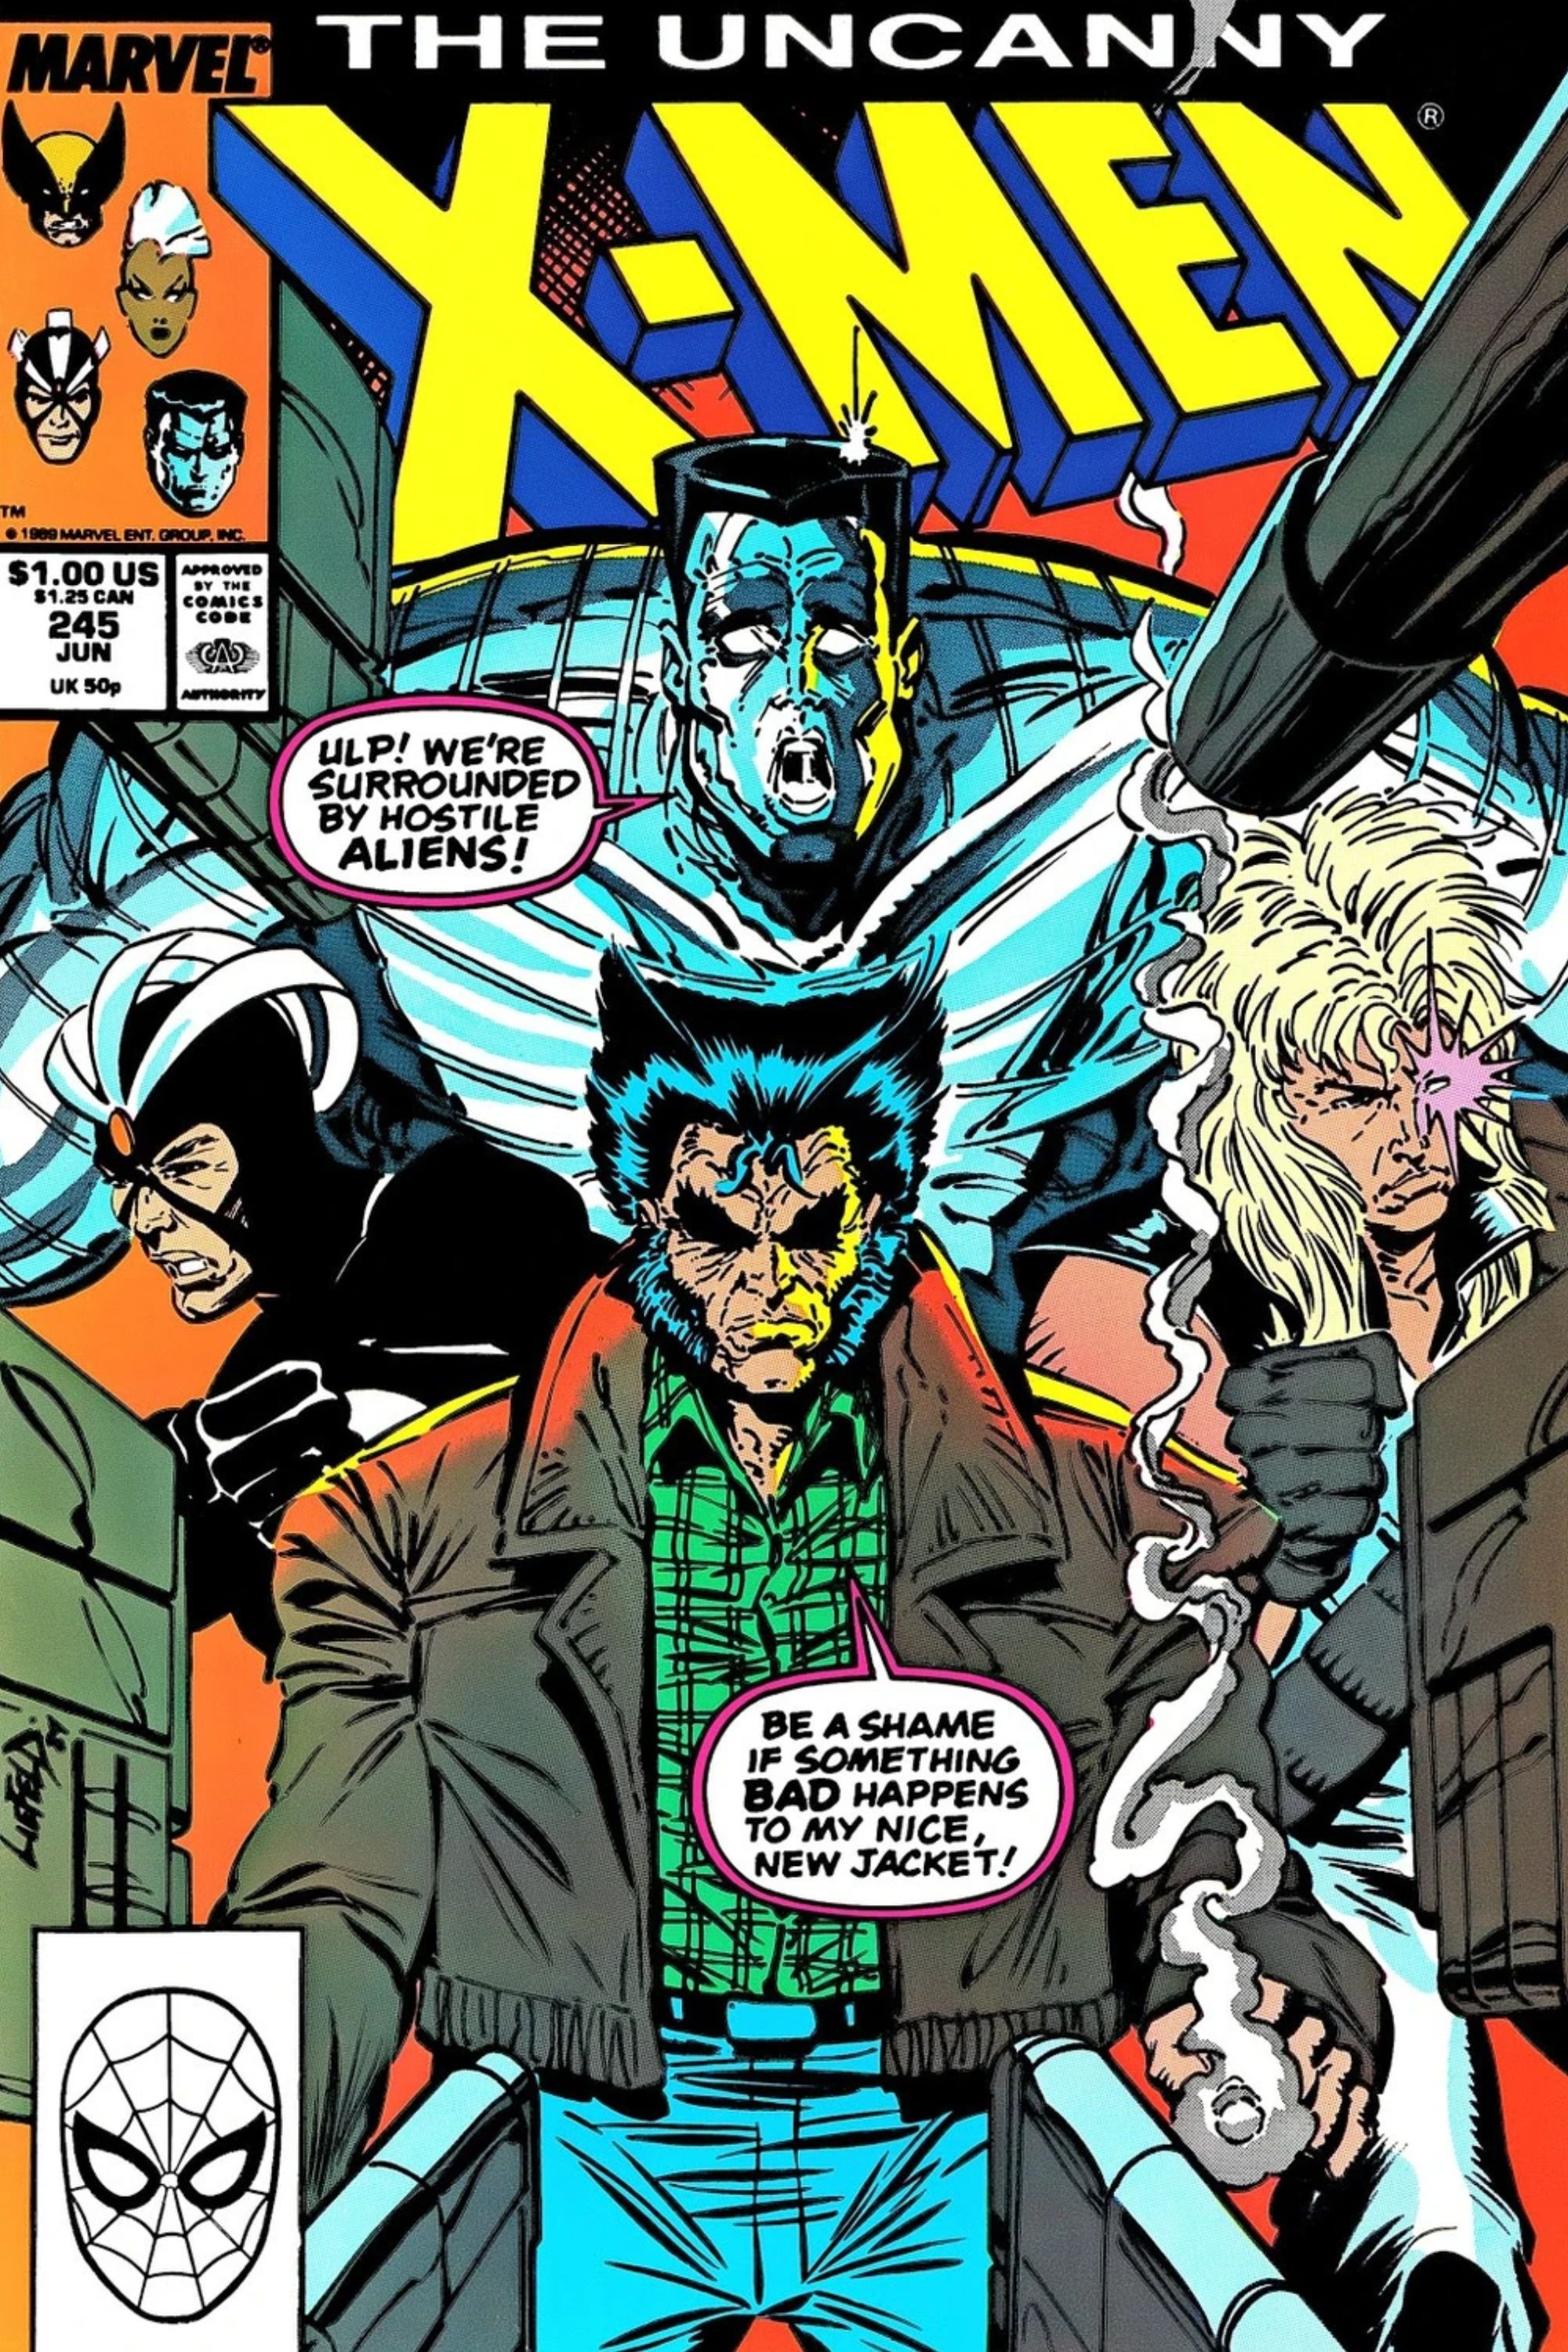 Wolverine and the X-Men in a Rob Liefeld Uncanny X-Men cover.